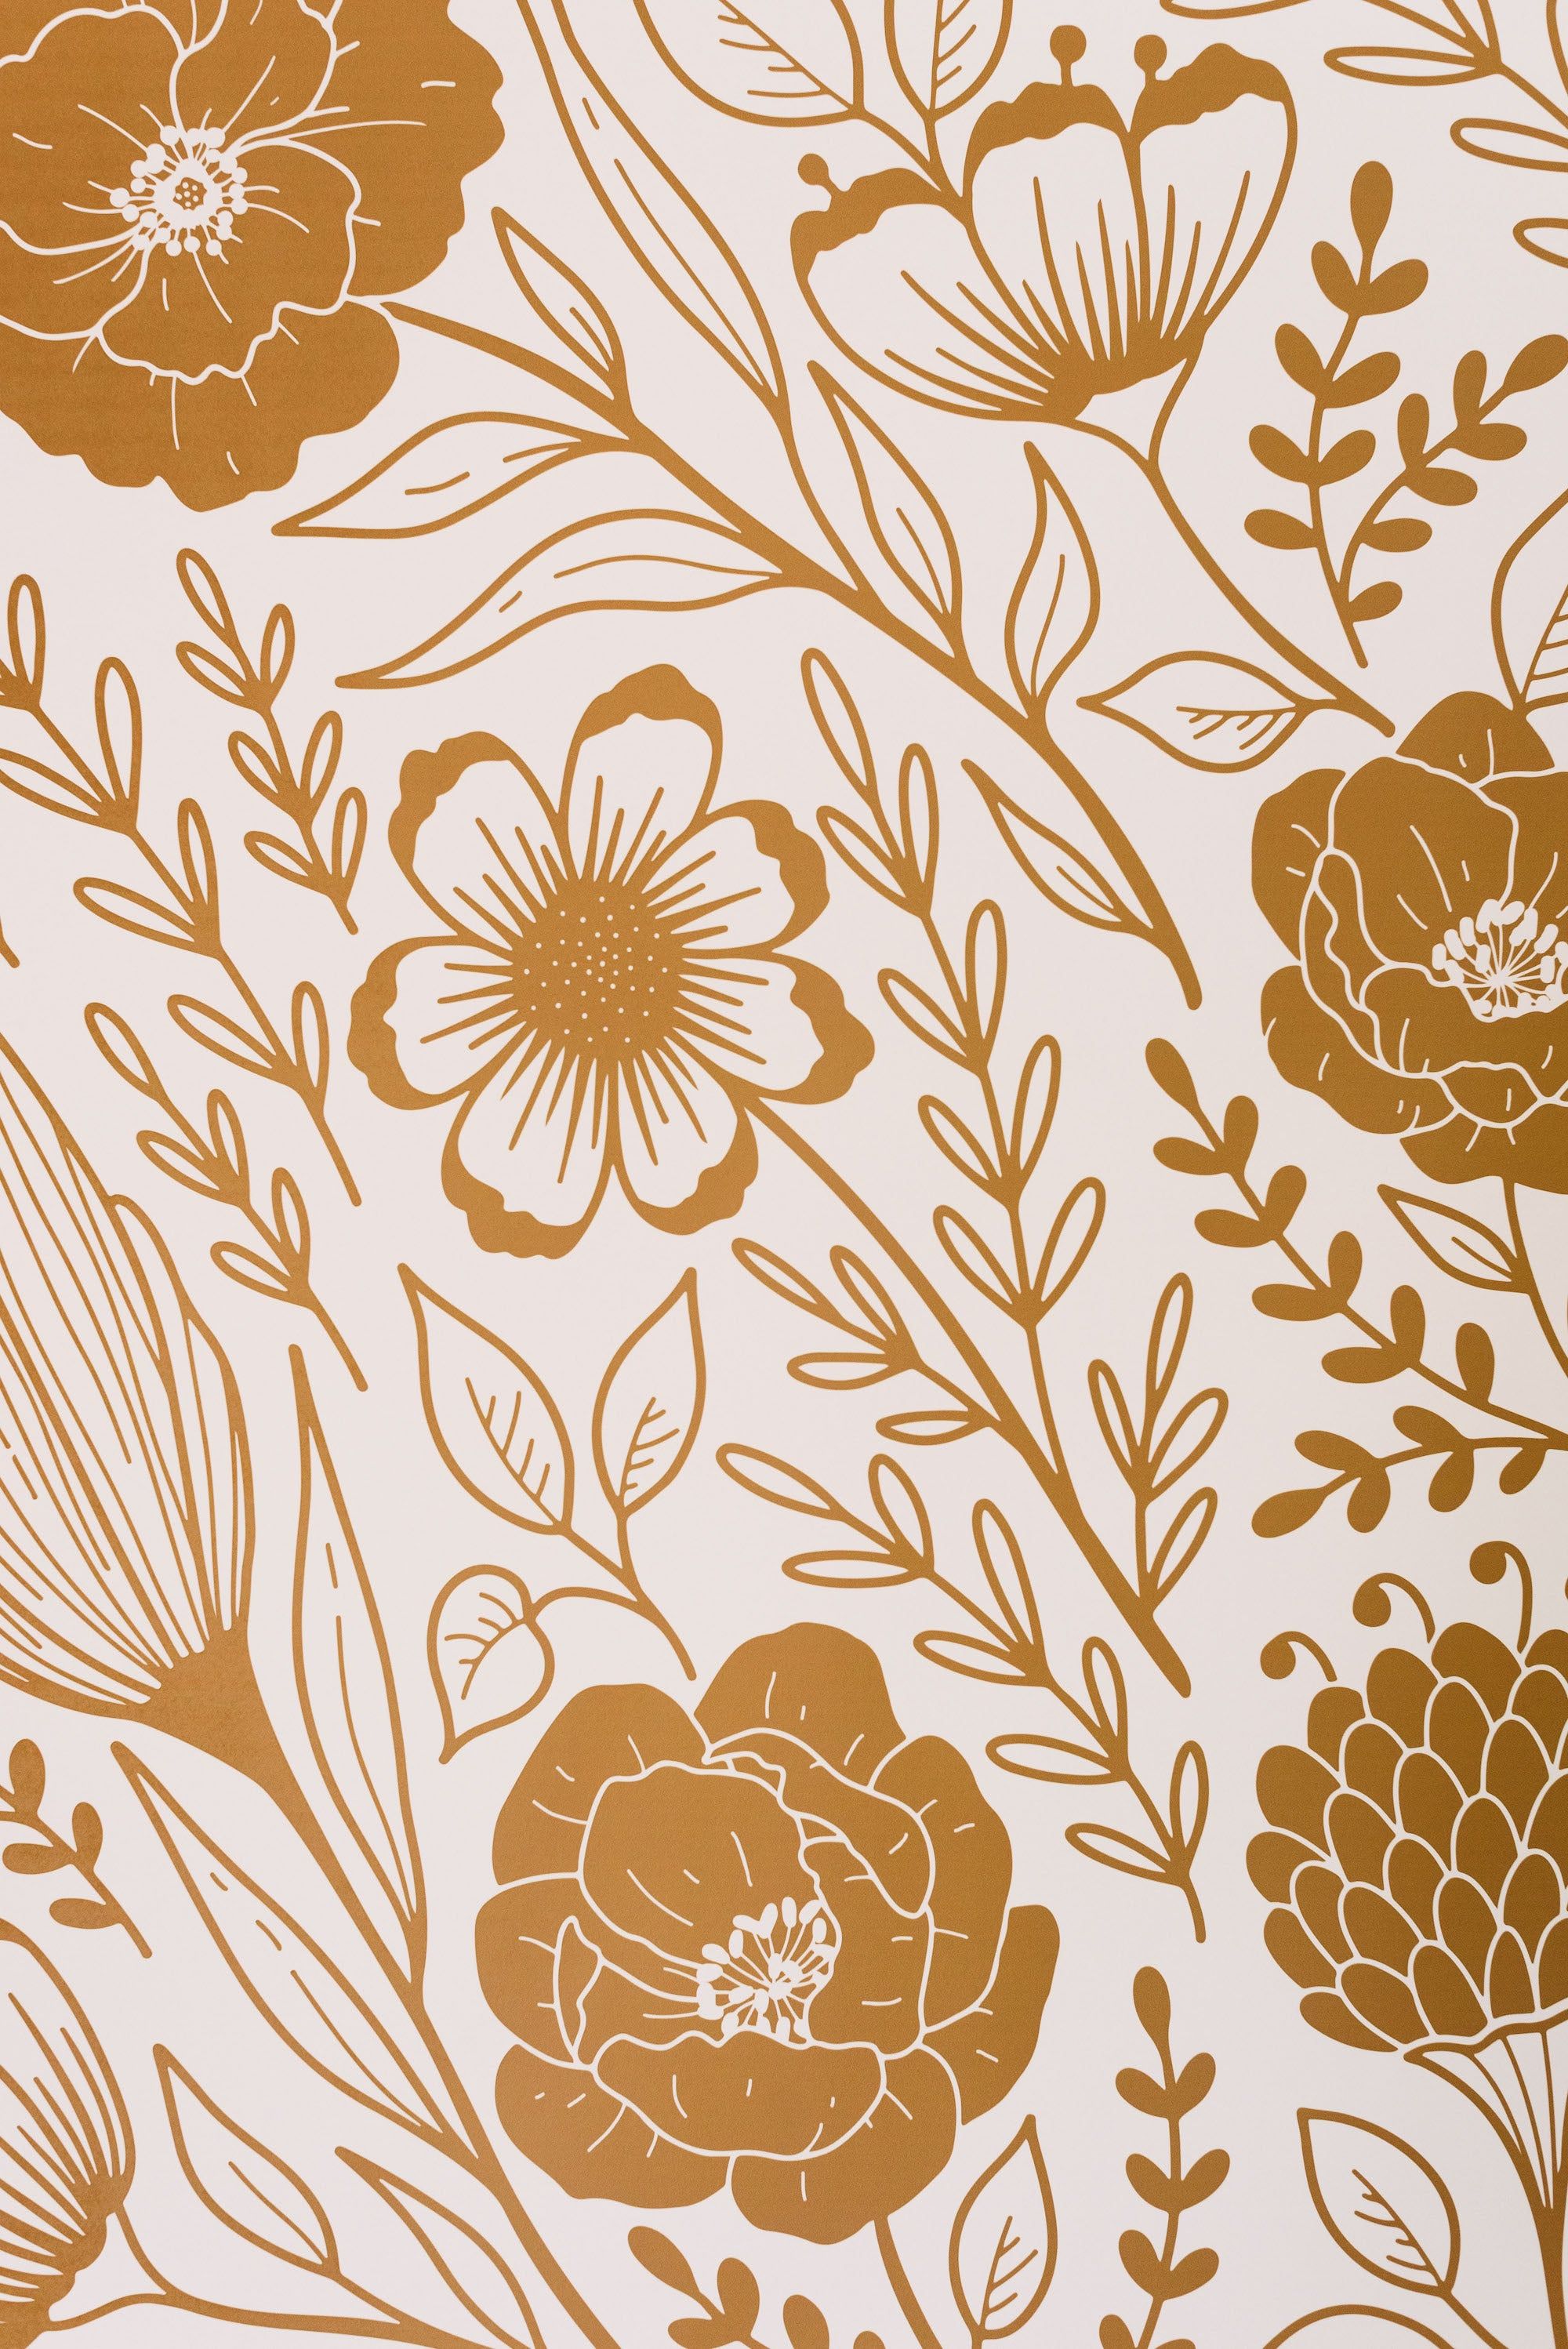 Retro Floral Wallpapers 4k Hd Retro Floral Backgrounds On Wallpaperbat